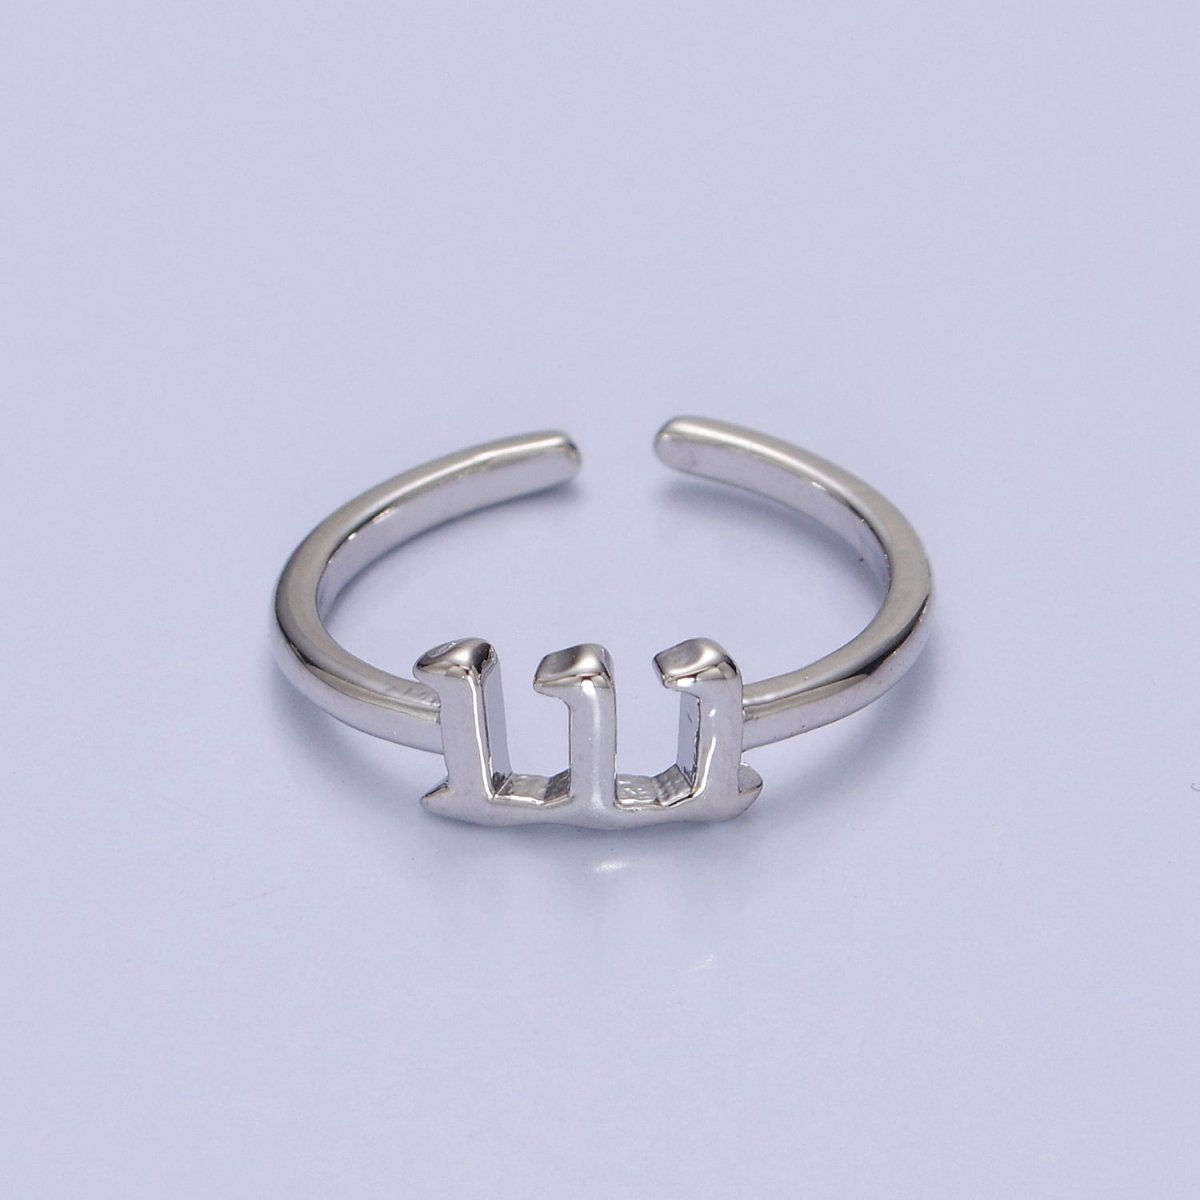 111 222 333 444 555 777 999 888 Angel Number Ring Silver Custom Jewelry Number Ring Open Adjustable Trend Ring O2047-O2055 - DLUXCA